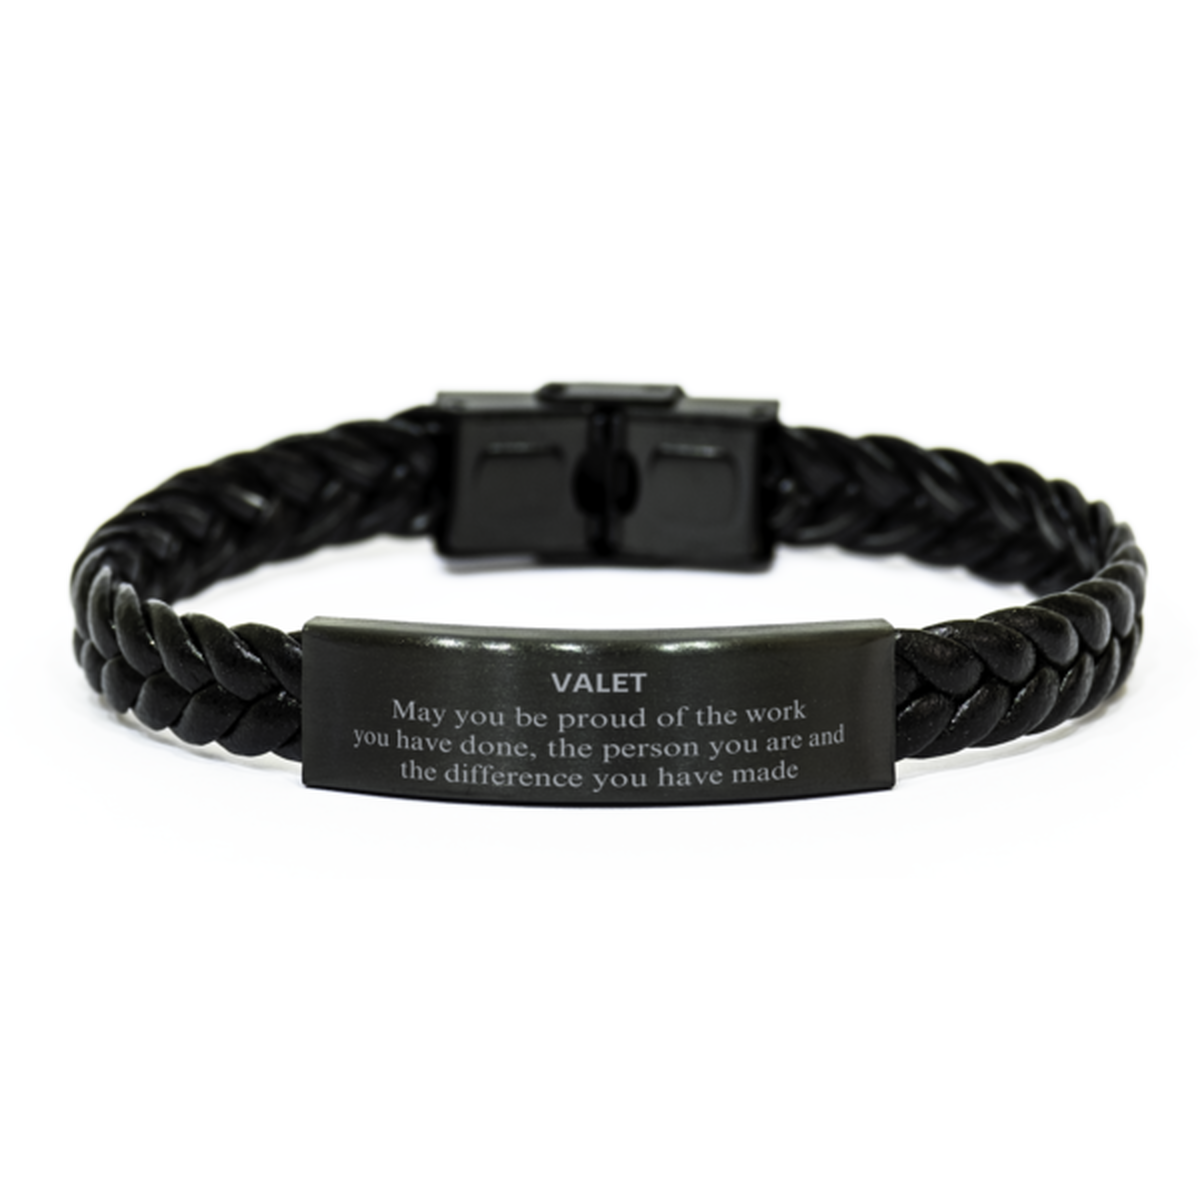 Valet May you be proud of the work you have done, Retirement Valet Braided Leather Bracelet for Colleague Appreciation Gifts Amazing for Valet